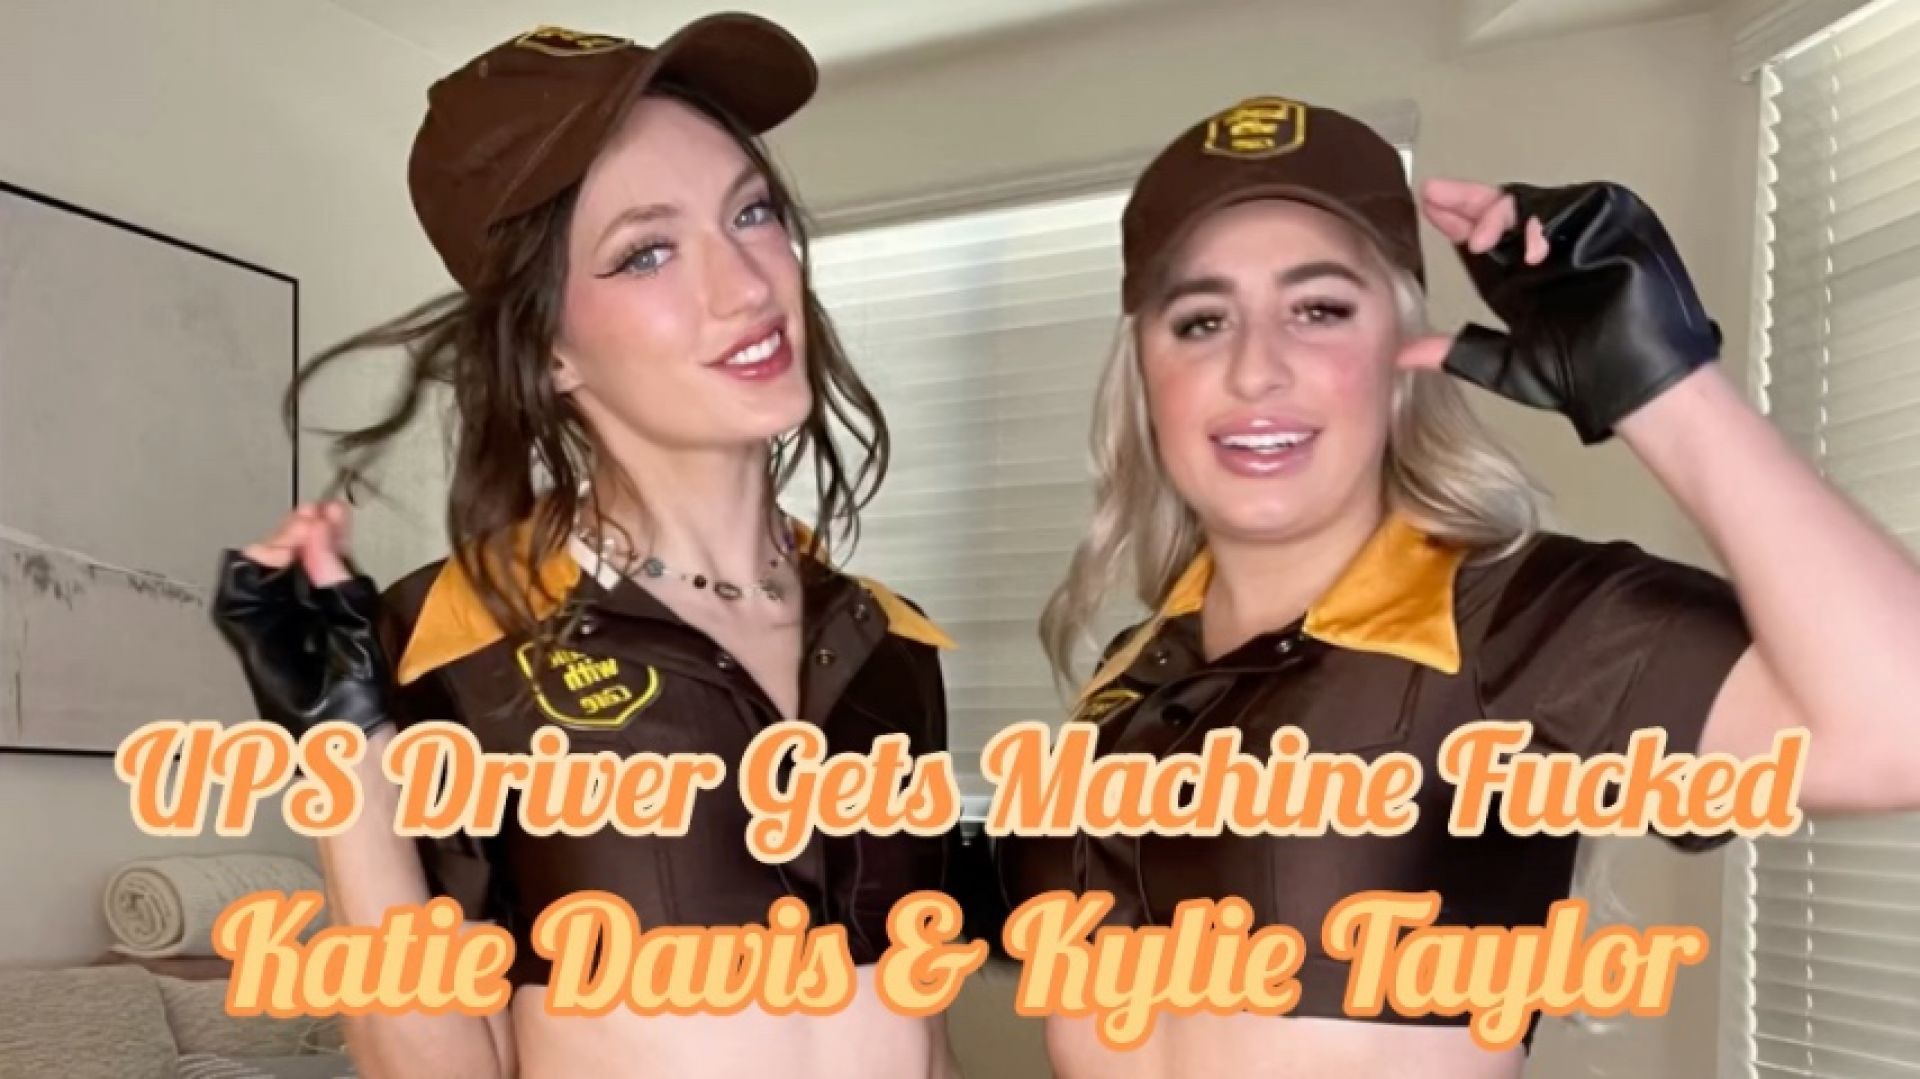 UPS Driver Gets Machine Fucked w/ Kylie Taylor